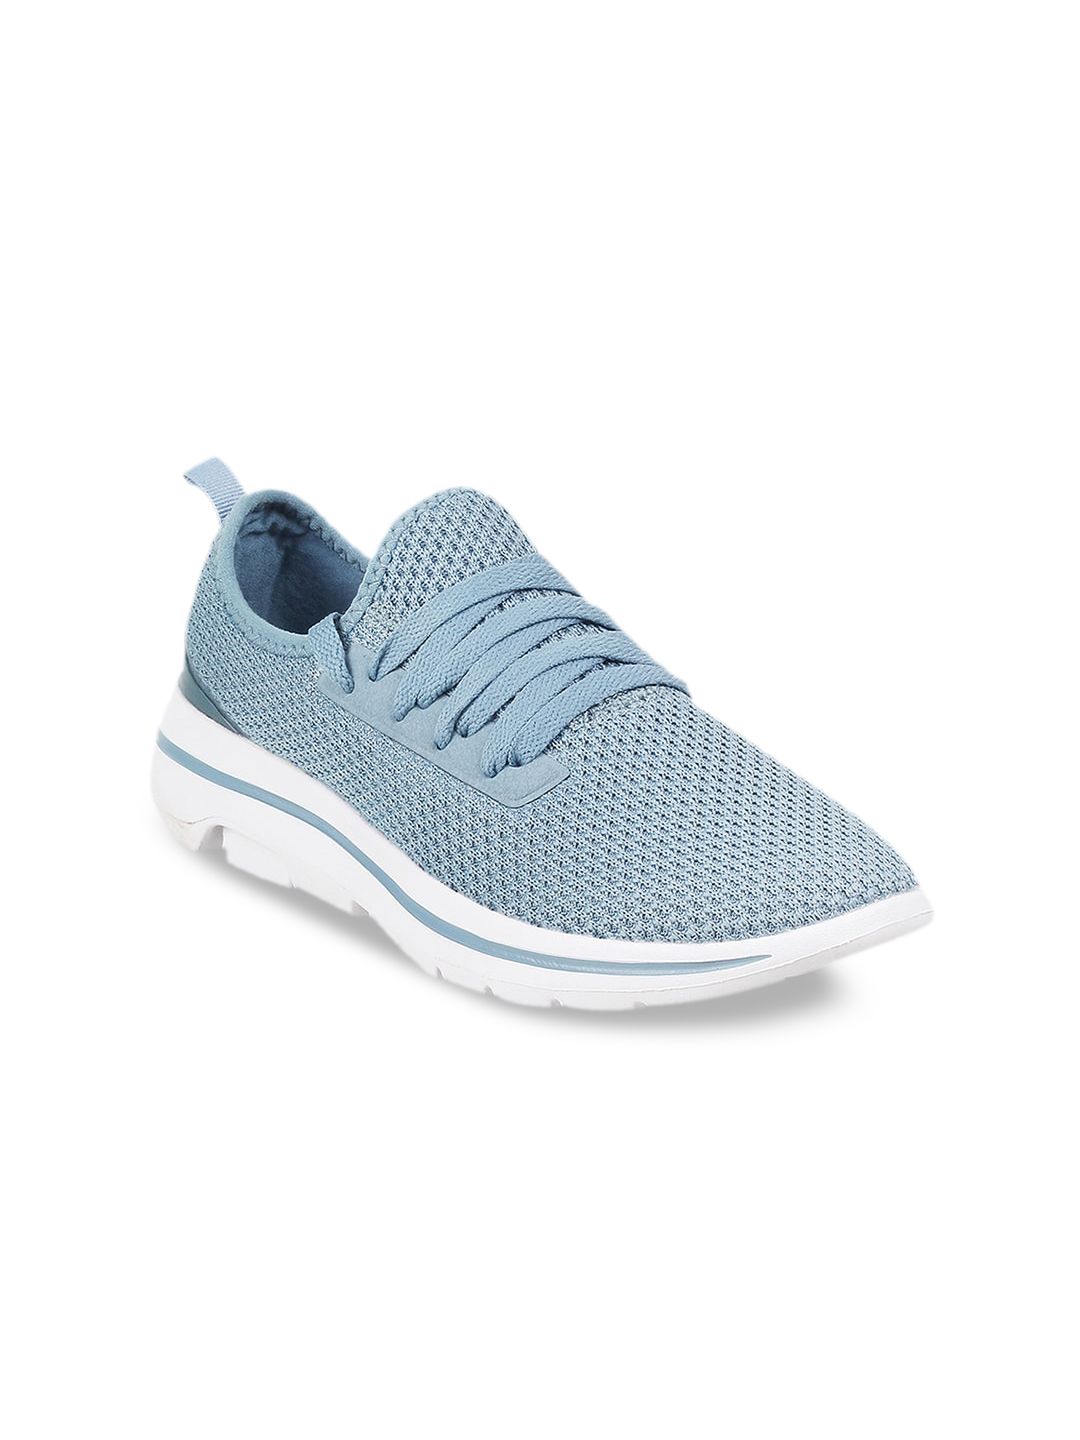 ACTIV Women Blue & White Textured Synthetic Sneakers Price in India